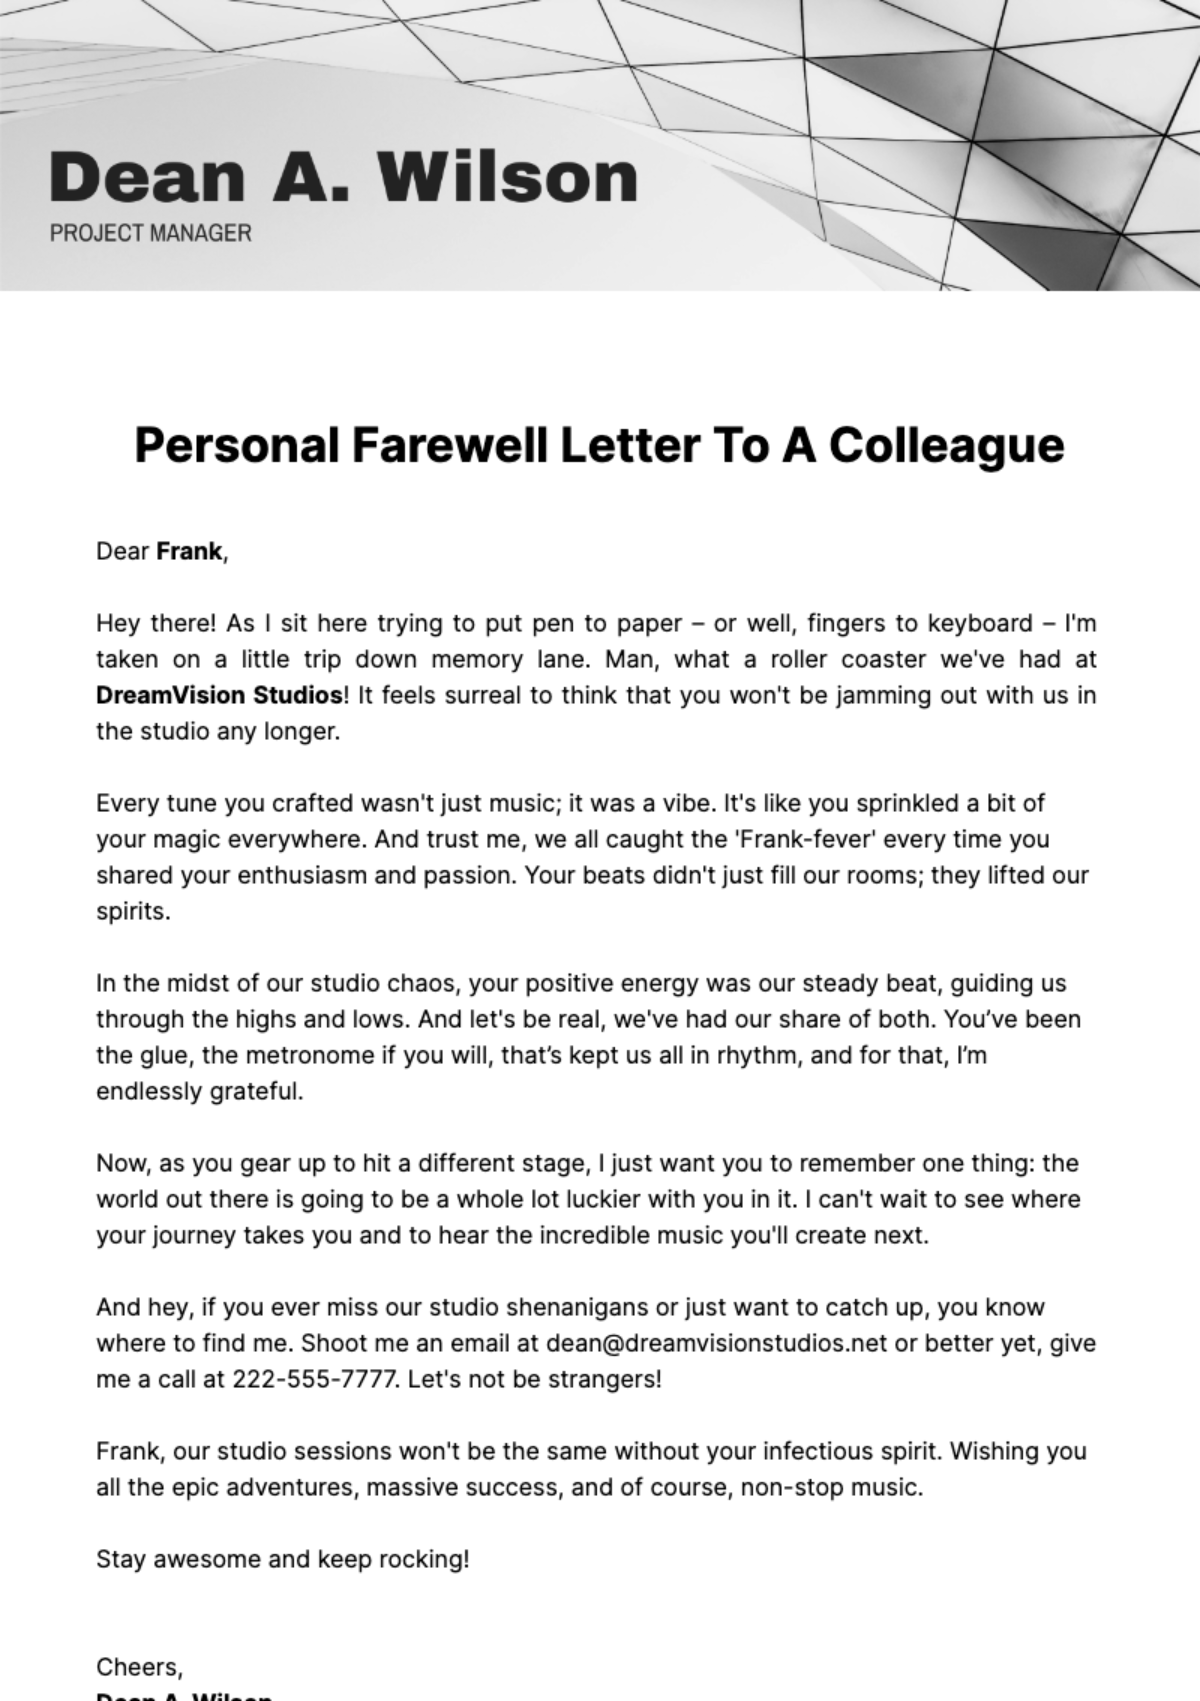 Personal Farewell Letter to a Colleague  Template